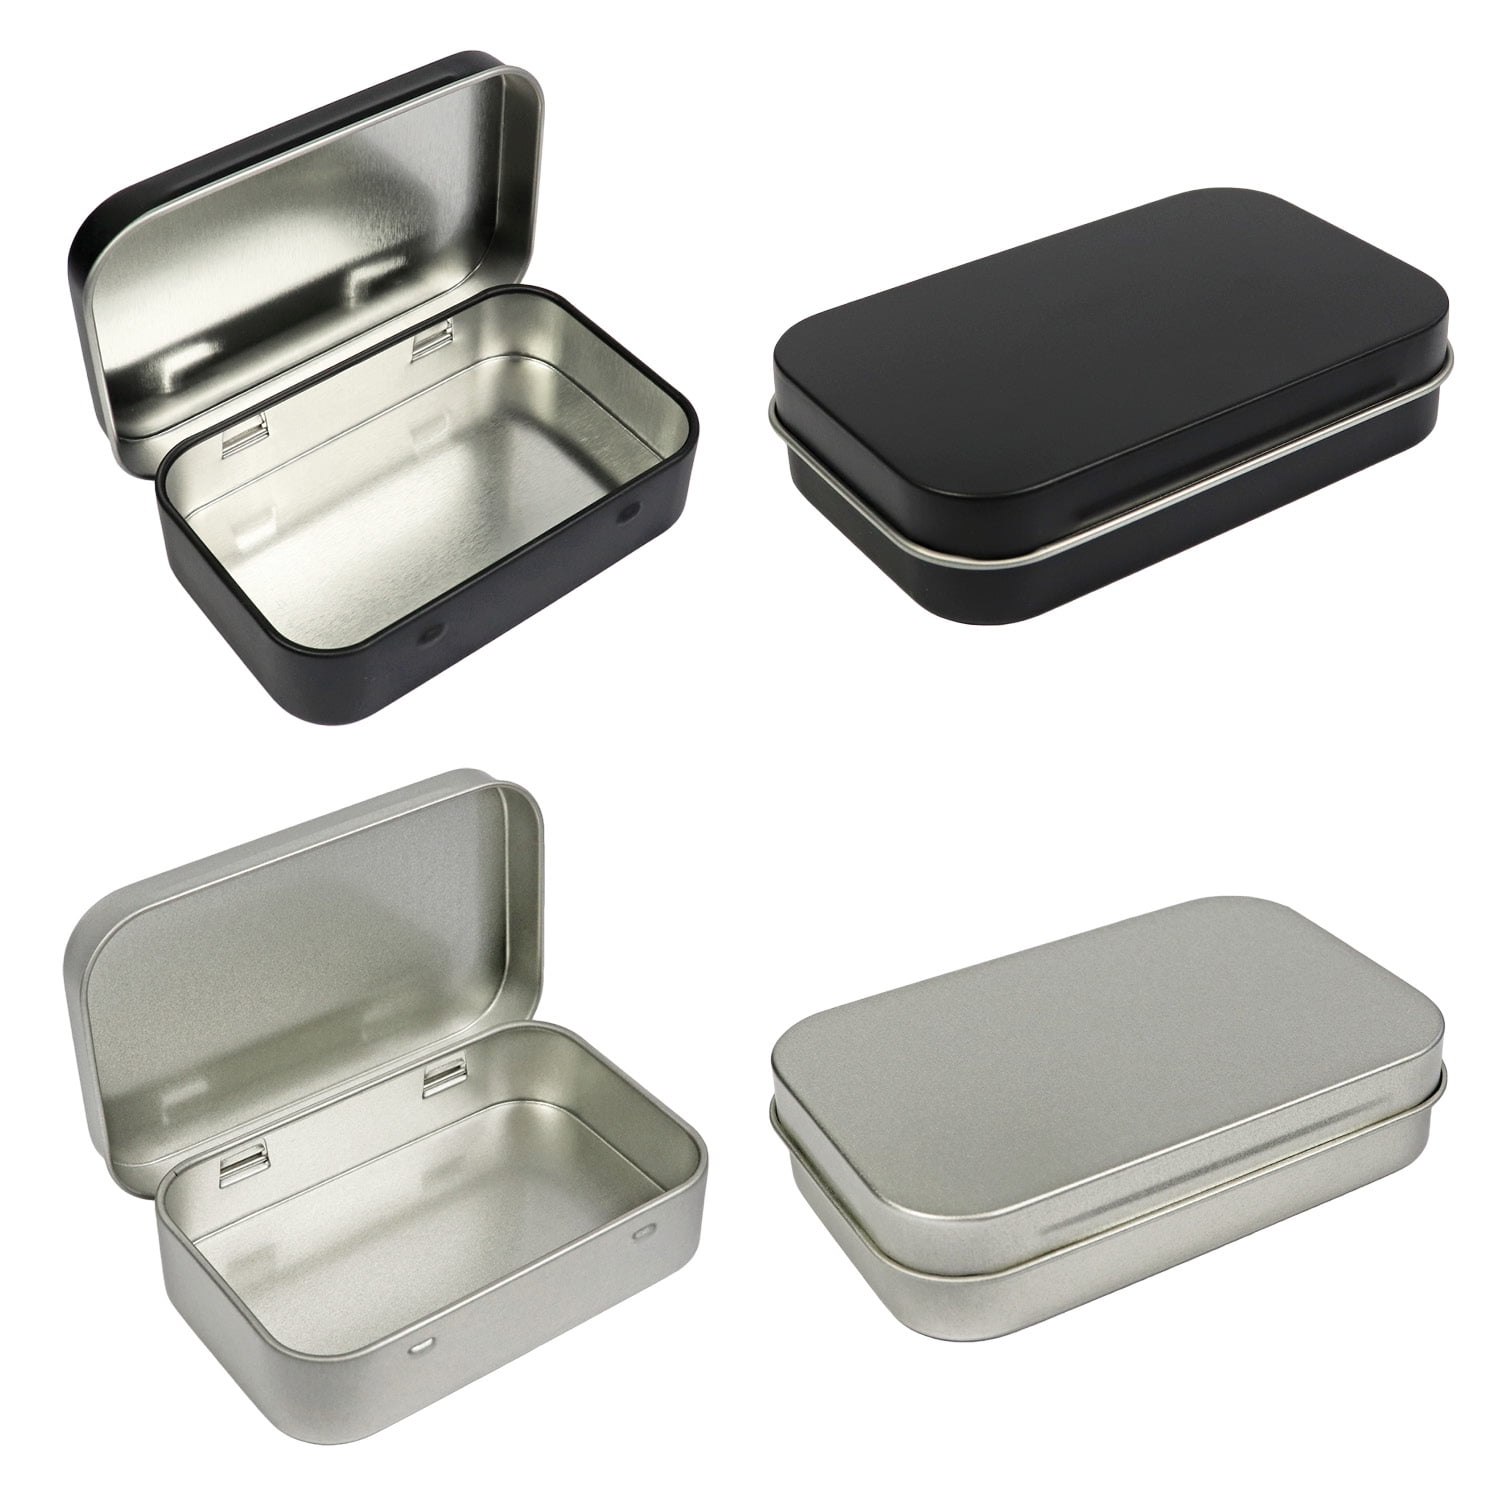 Silver Metal Rectangular Empty Hinged Tins Box Case Containers Small Storage Kit 